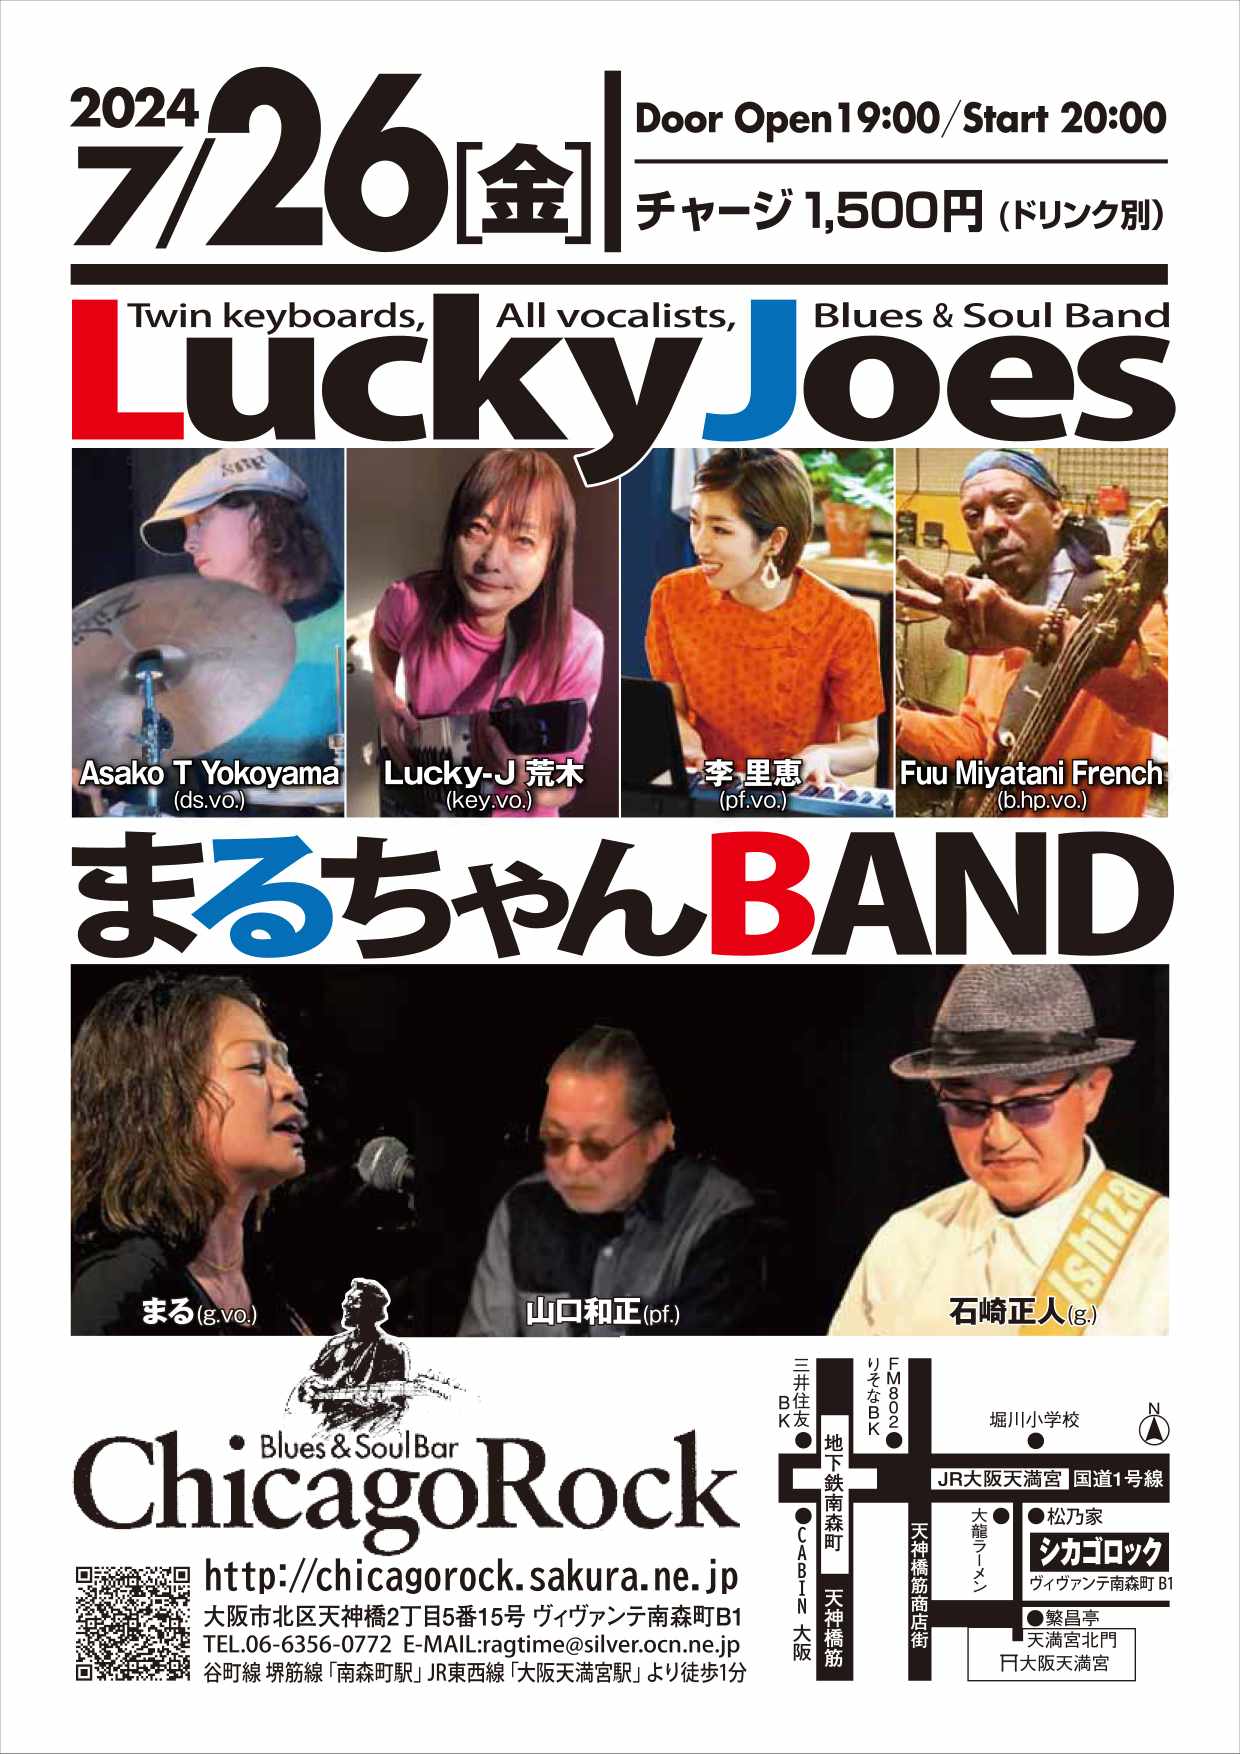 ♪ChicagoRockers【BLUES LIVE 2009.12.18 All Star Musisians】DVD♪Blues＆Soulmusic シカゴロック